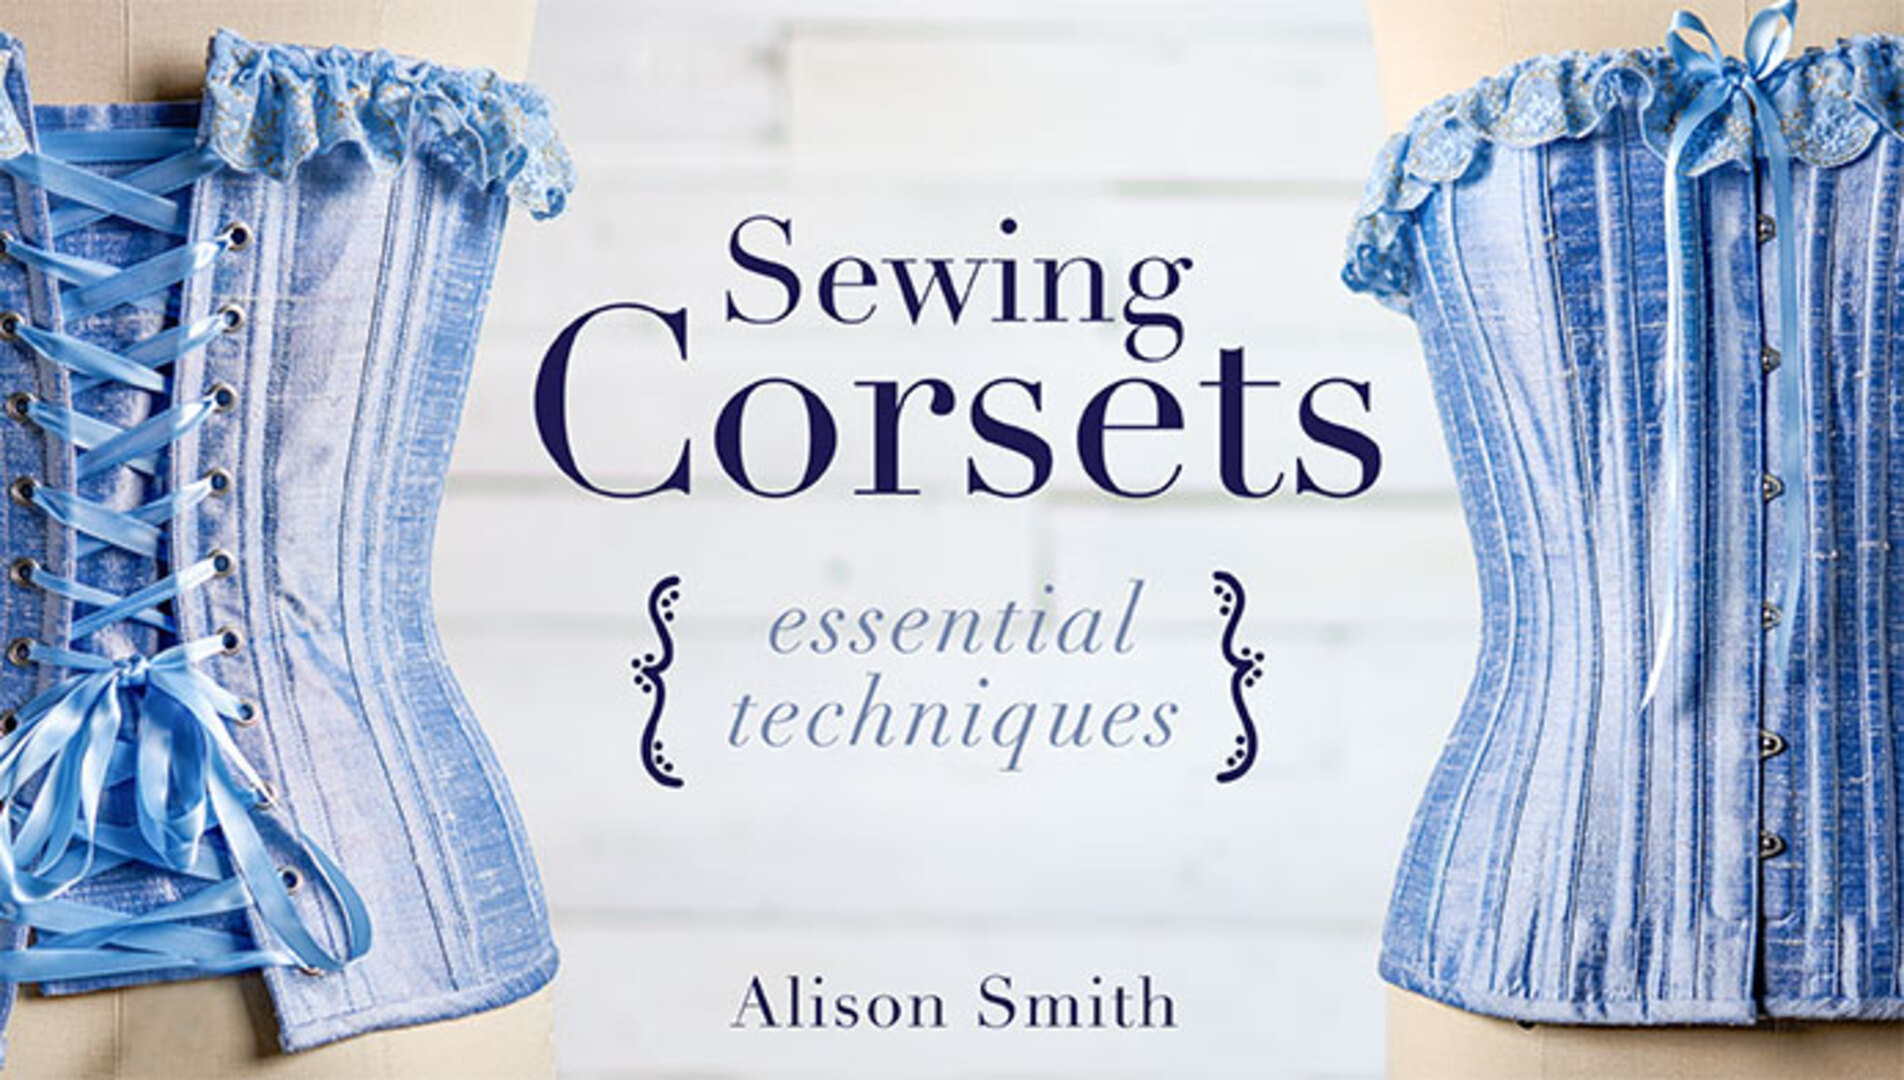 The Sewing Book by Alison Smith - Video Review - Easy Sewing For